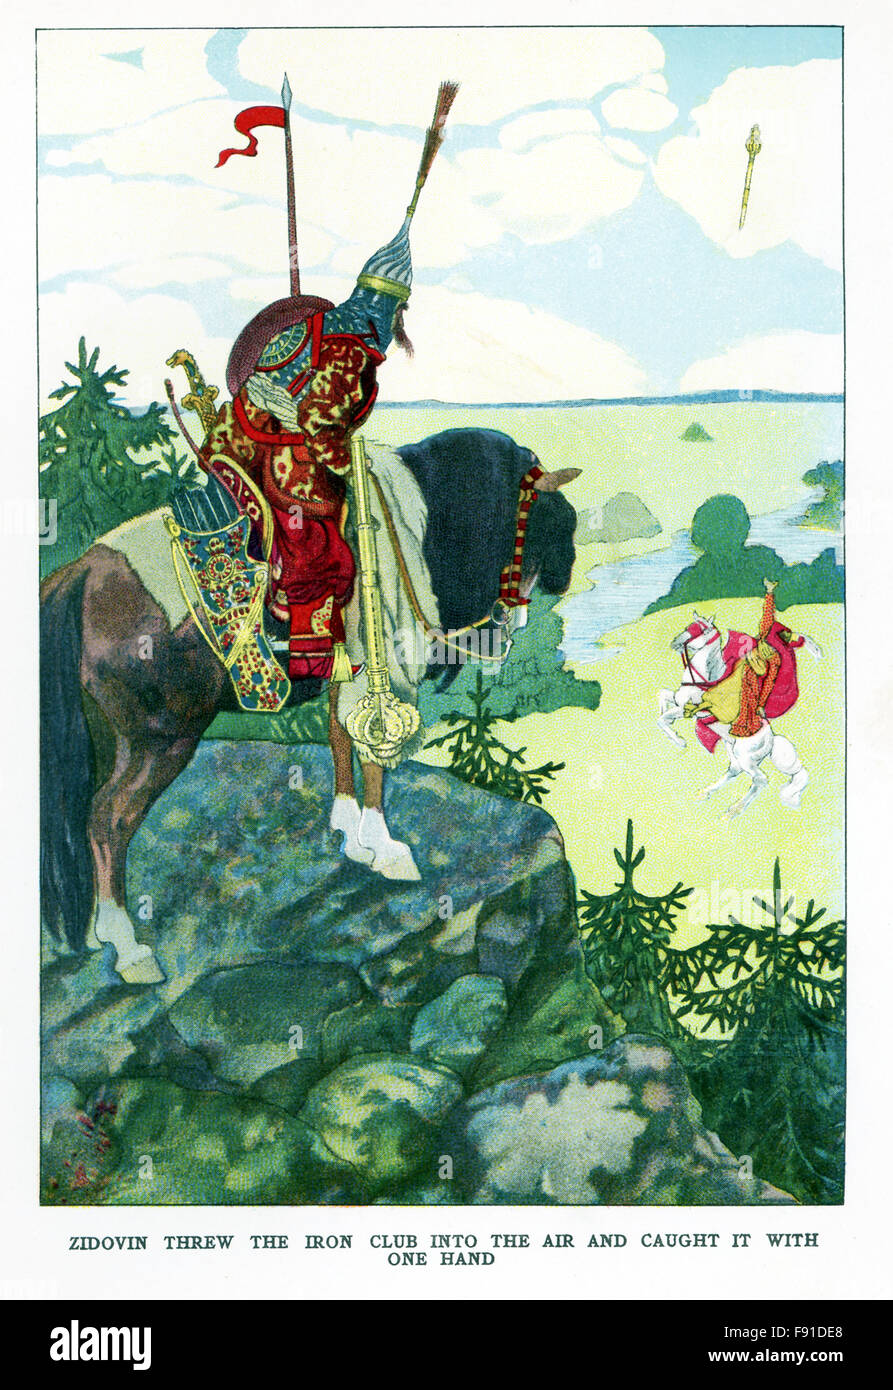 The caption for this 1923 illustration reads: Zidovin threw the iron club into the air and caught it with one hand. The great Russian hero Ilia Muromec watched this and then rode forward to do battle. Ilia was born in Kiev. For thirty years, he and twelve knights had guarded the city castle, until one day the mighty Zidovin appeared. The battle between Zidovin and Ilia was mighty and fierce, with Ilia vanquishing Zidovin. Stock Photo